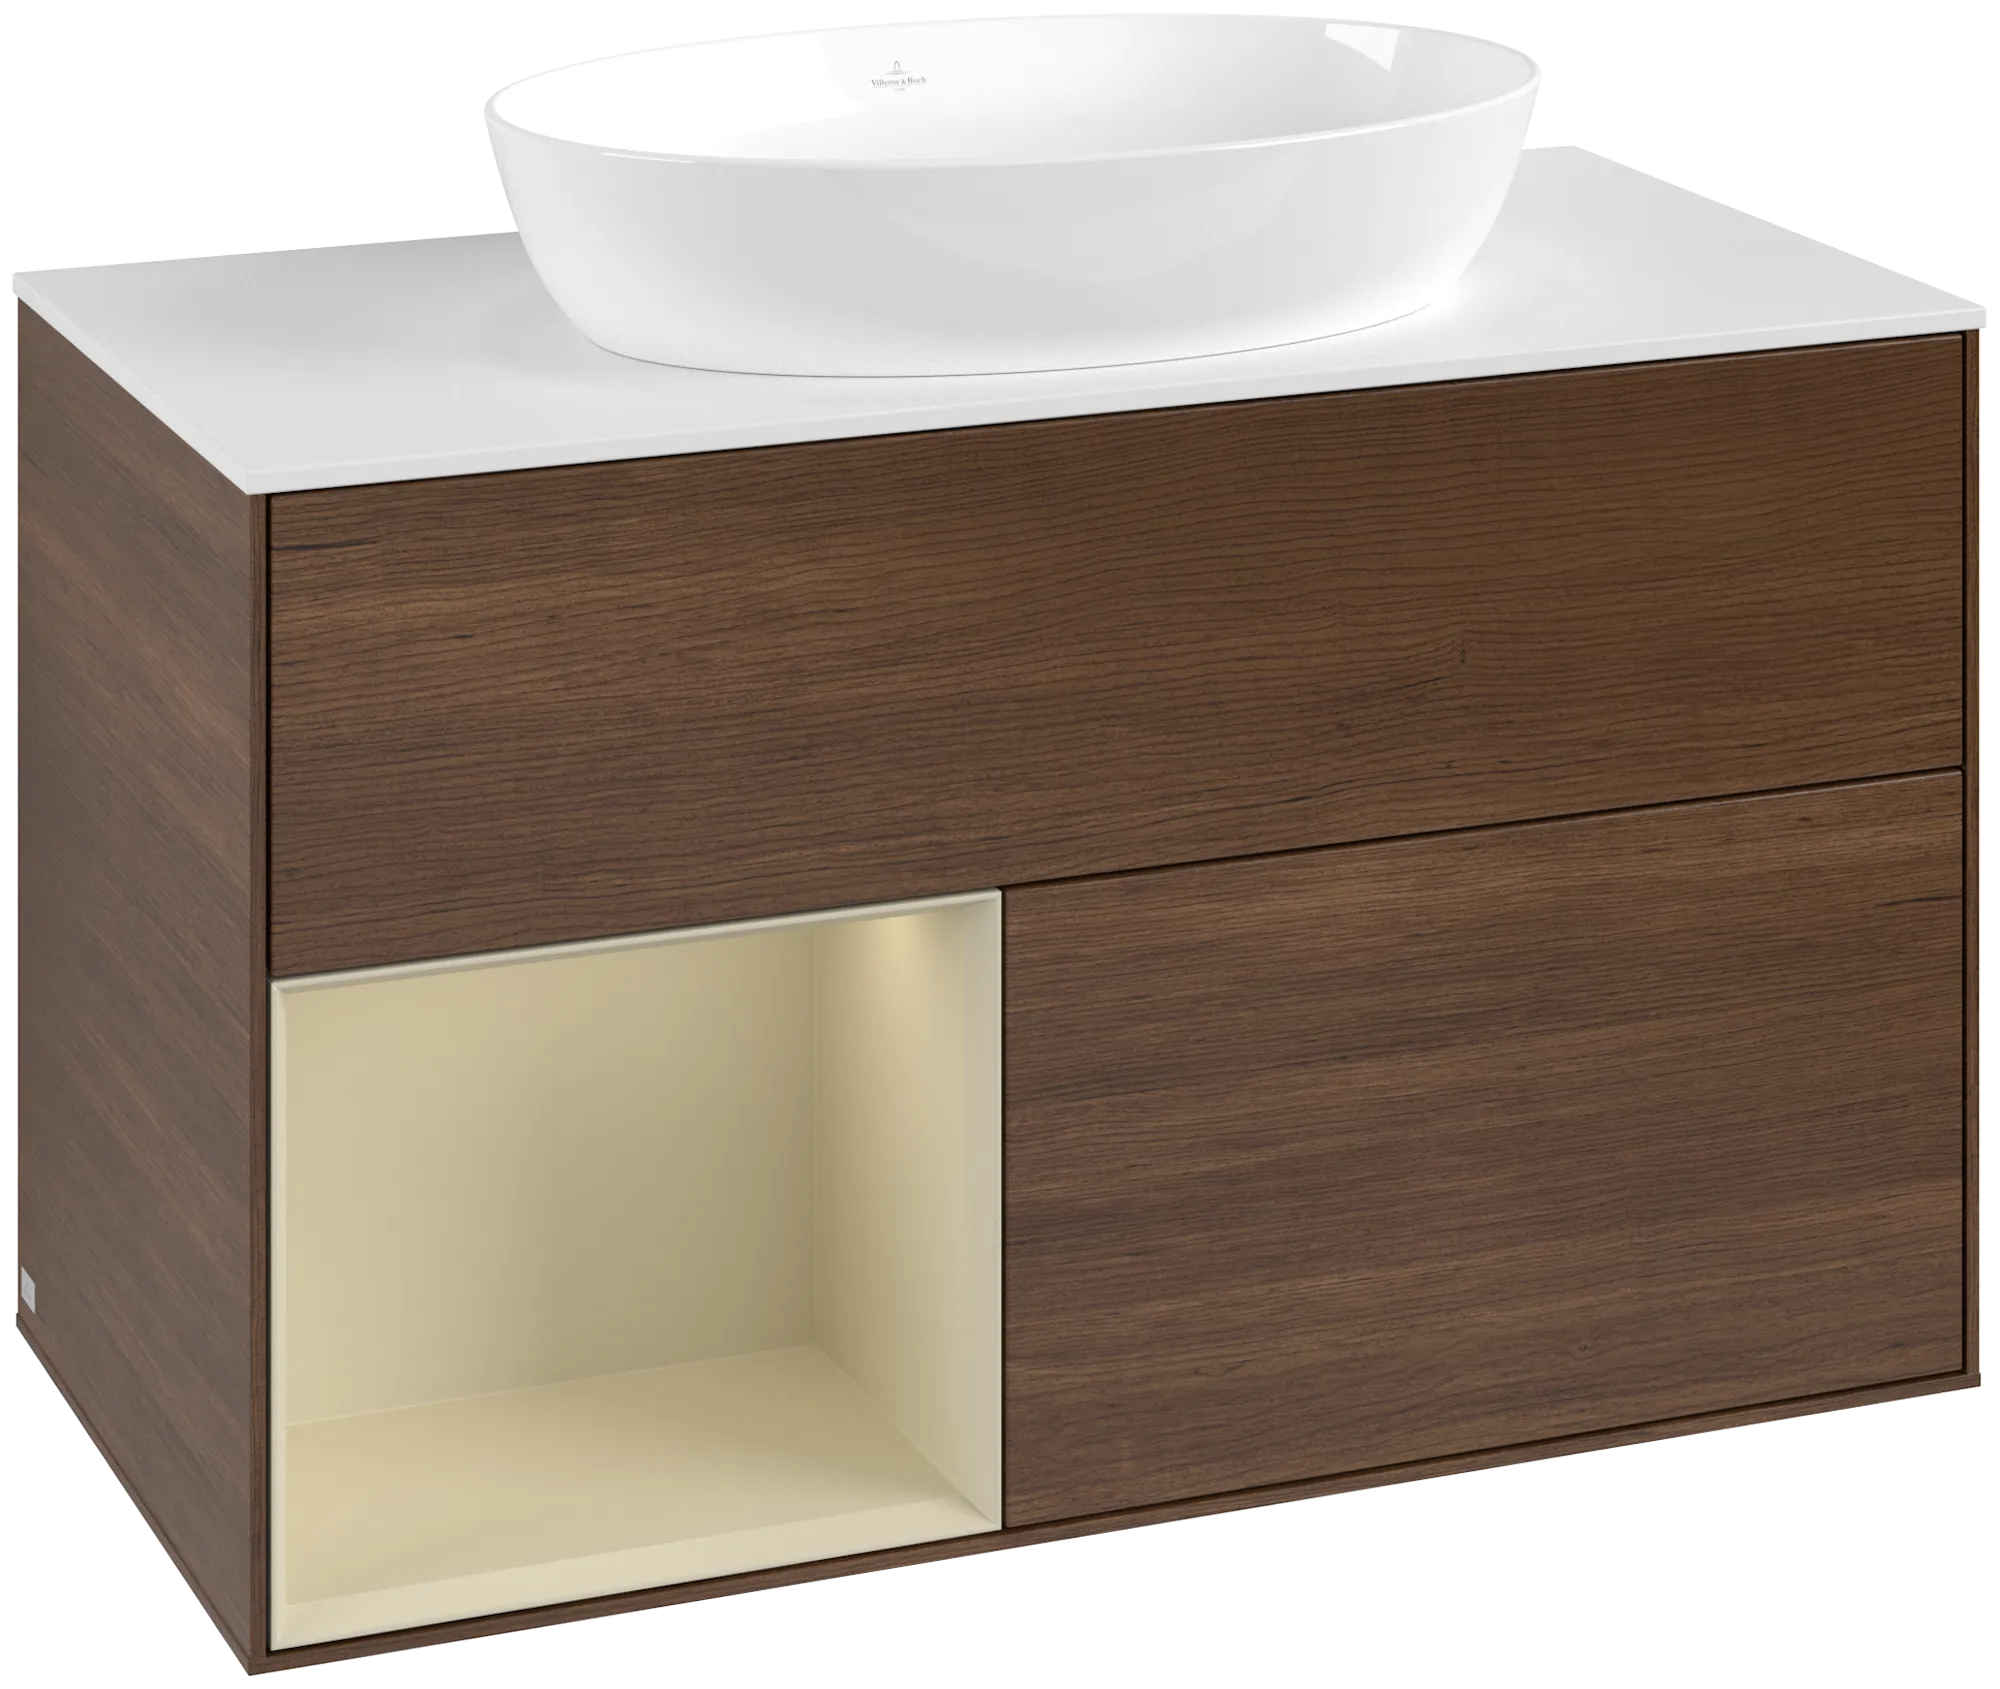 Picture of VILLEROY BOCH Finion Vanity unit, with lighting, 2 pull-out compartments, 1000 x 603 x 501 mm, Walnut Veneer / Silk Grey Matt Lacquer / Glass White Matt #GA11HJGN